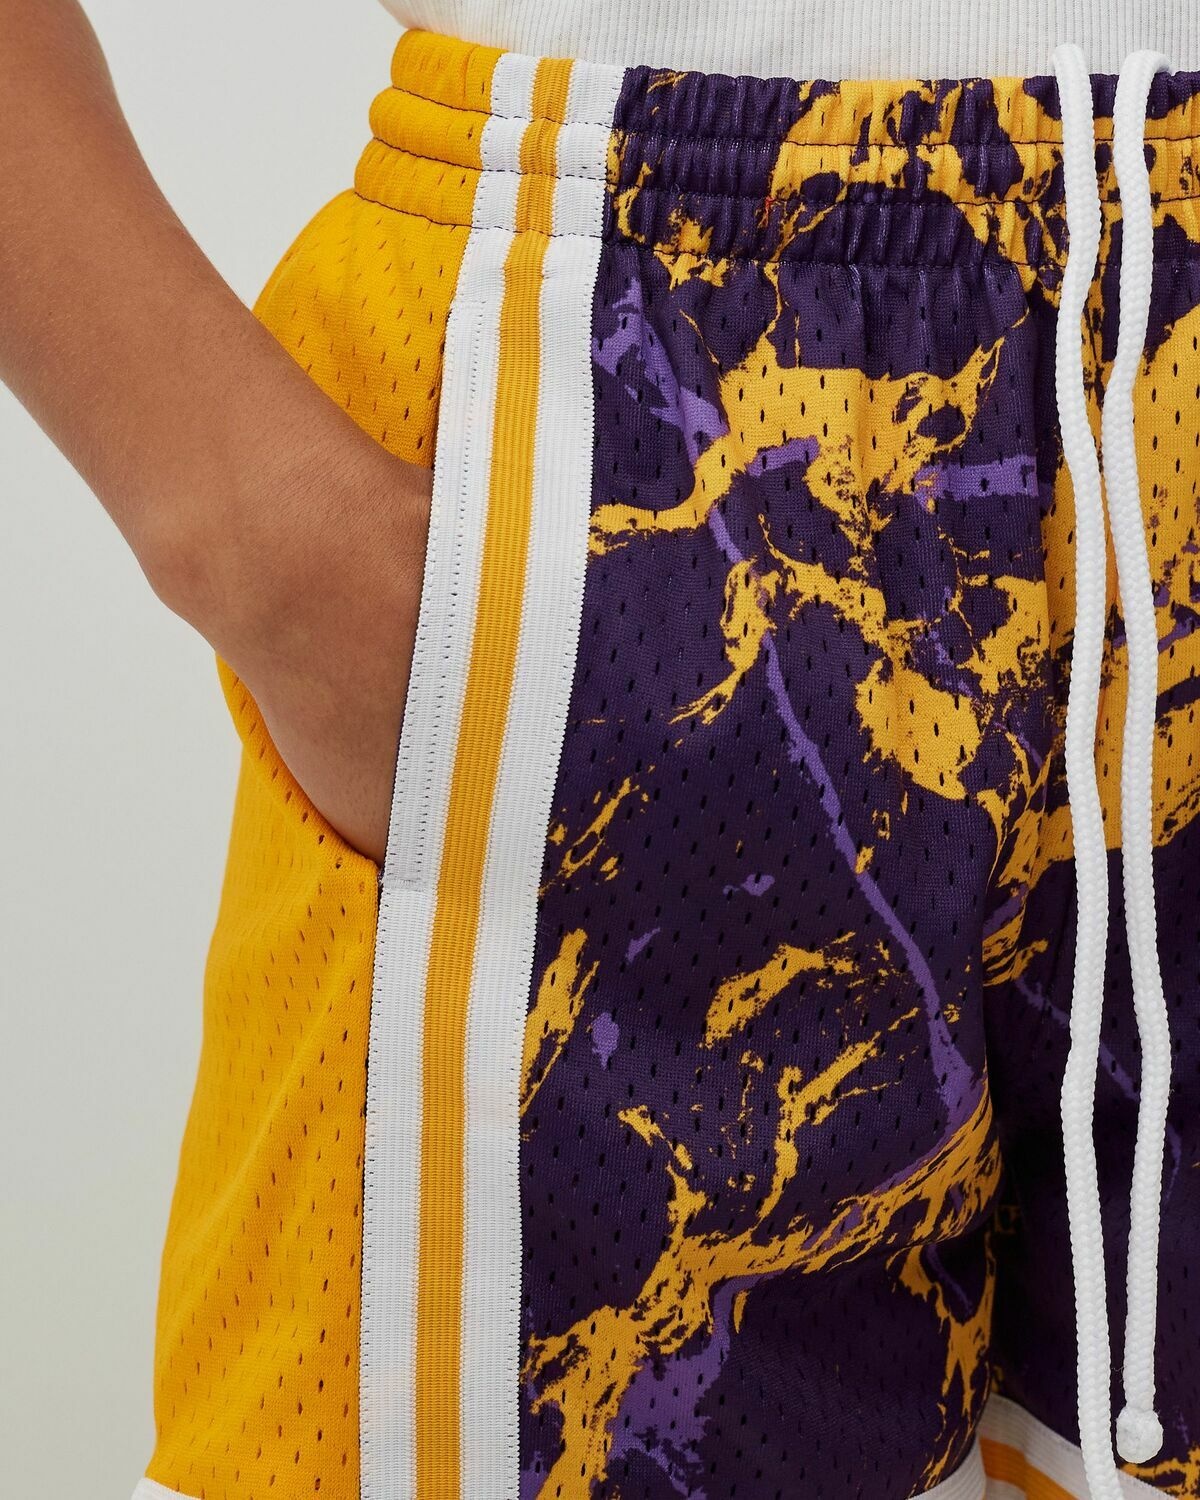 Mitchell & Ness Wmns Nba W Team Marble Shorts Lakers Purple/Yellow - Womens - Sport & Team Shorts